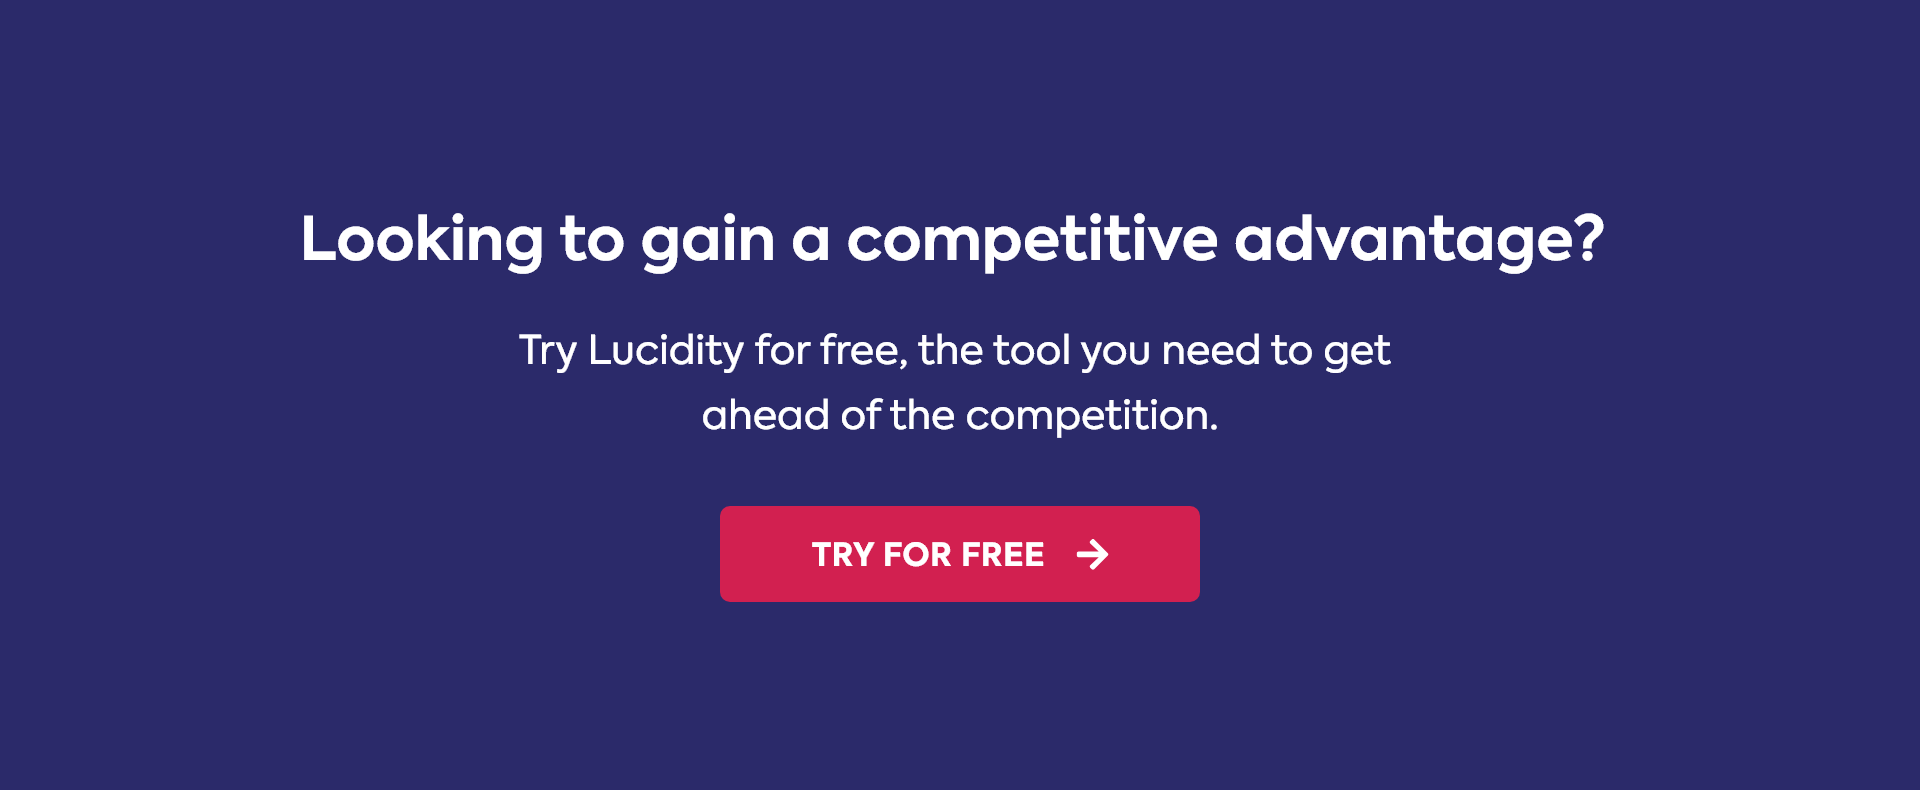 Looking to gain competitive advantage?